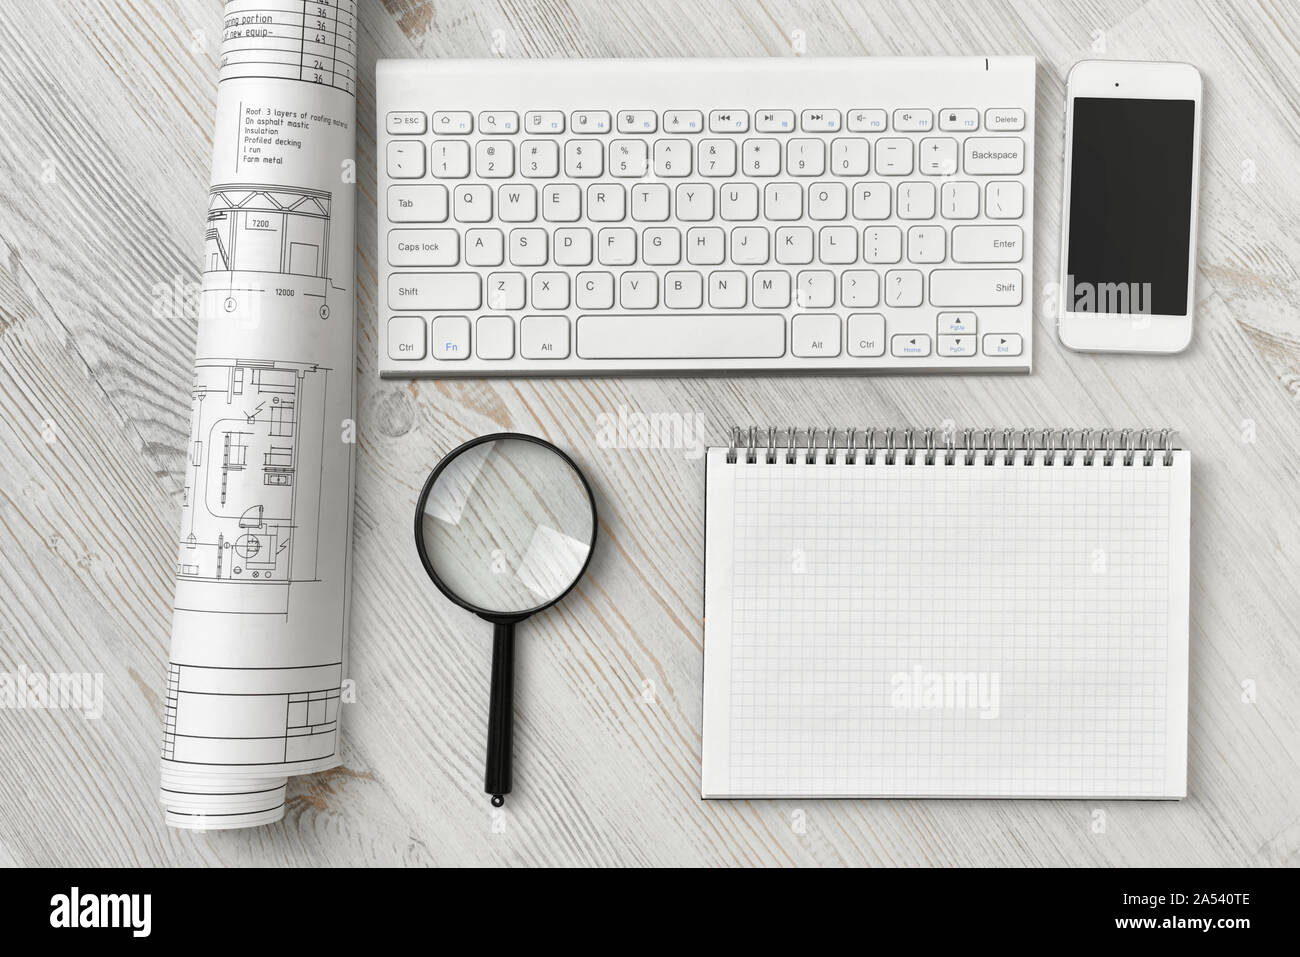 Office workspace with architectural drawing, keyboard, smarthphone, clean book and magnifier on wooden surface in top view Stock Photo